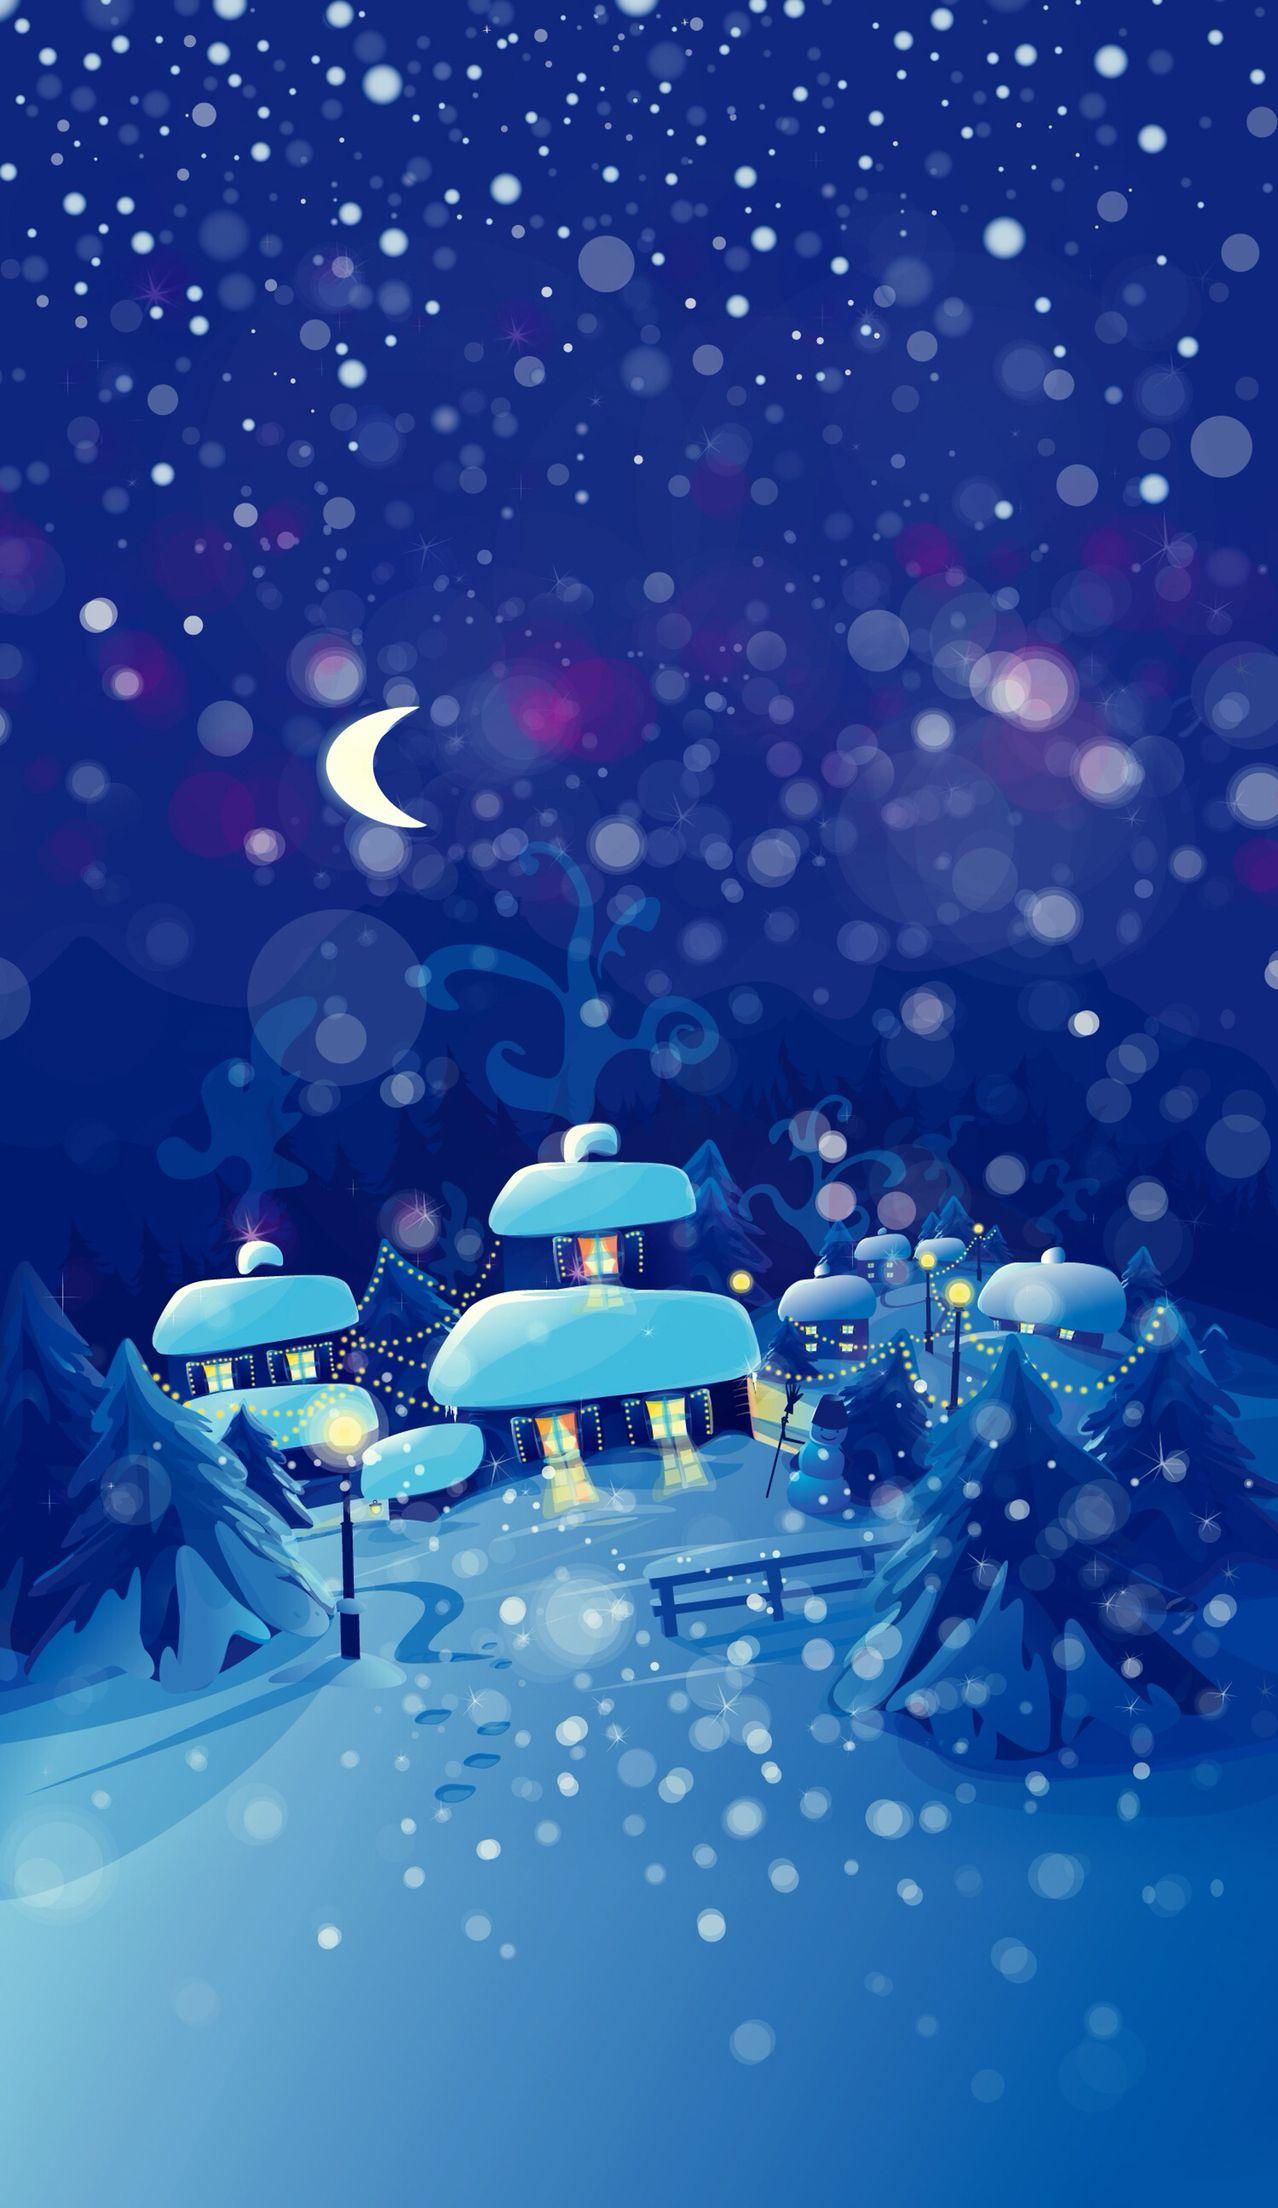 Winter Wonderland ☆ Find more Seasonal wallpapers for your